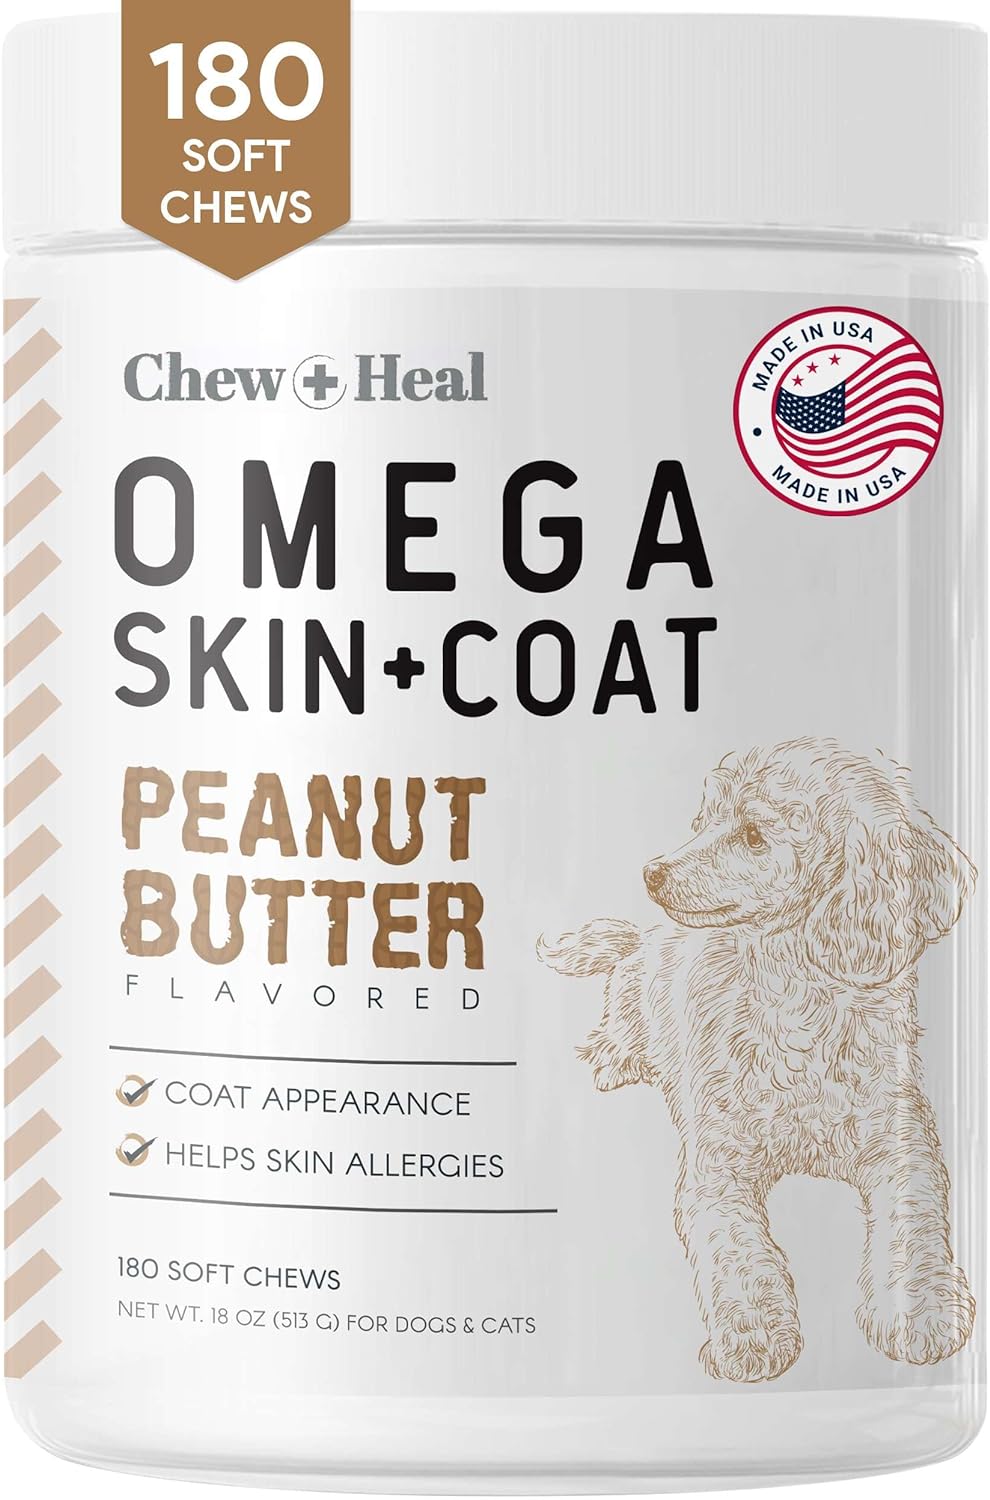 Omega for Dogs - 180 Delicious Soft Chews - Salmon Oil Treats for Skin and Coat, Itch Relief - Fish Oil Blend of Essential Fatty Acids, Omega 3, 6, and 9, and Vitamins - Peanut Butter Flavor